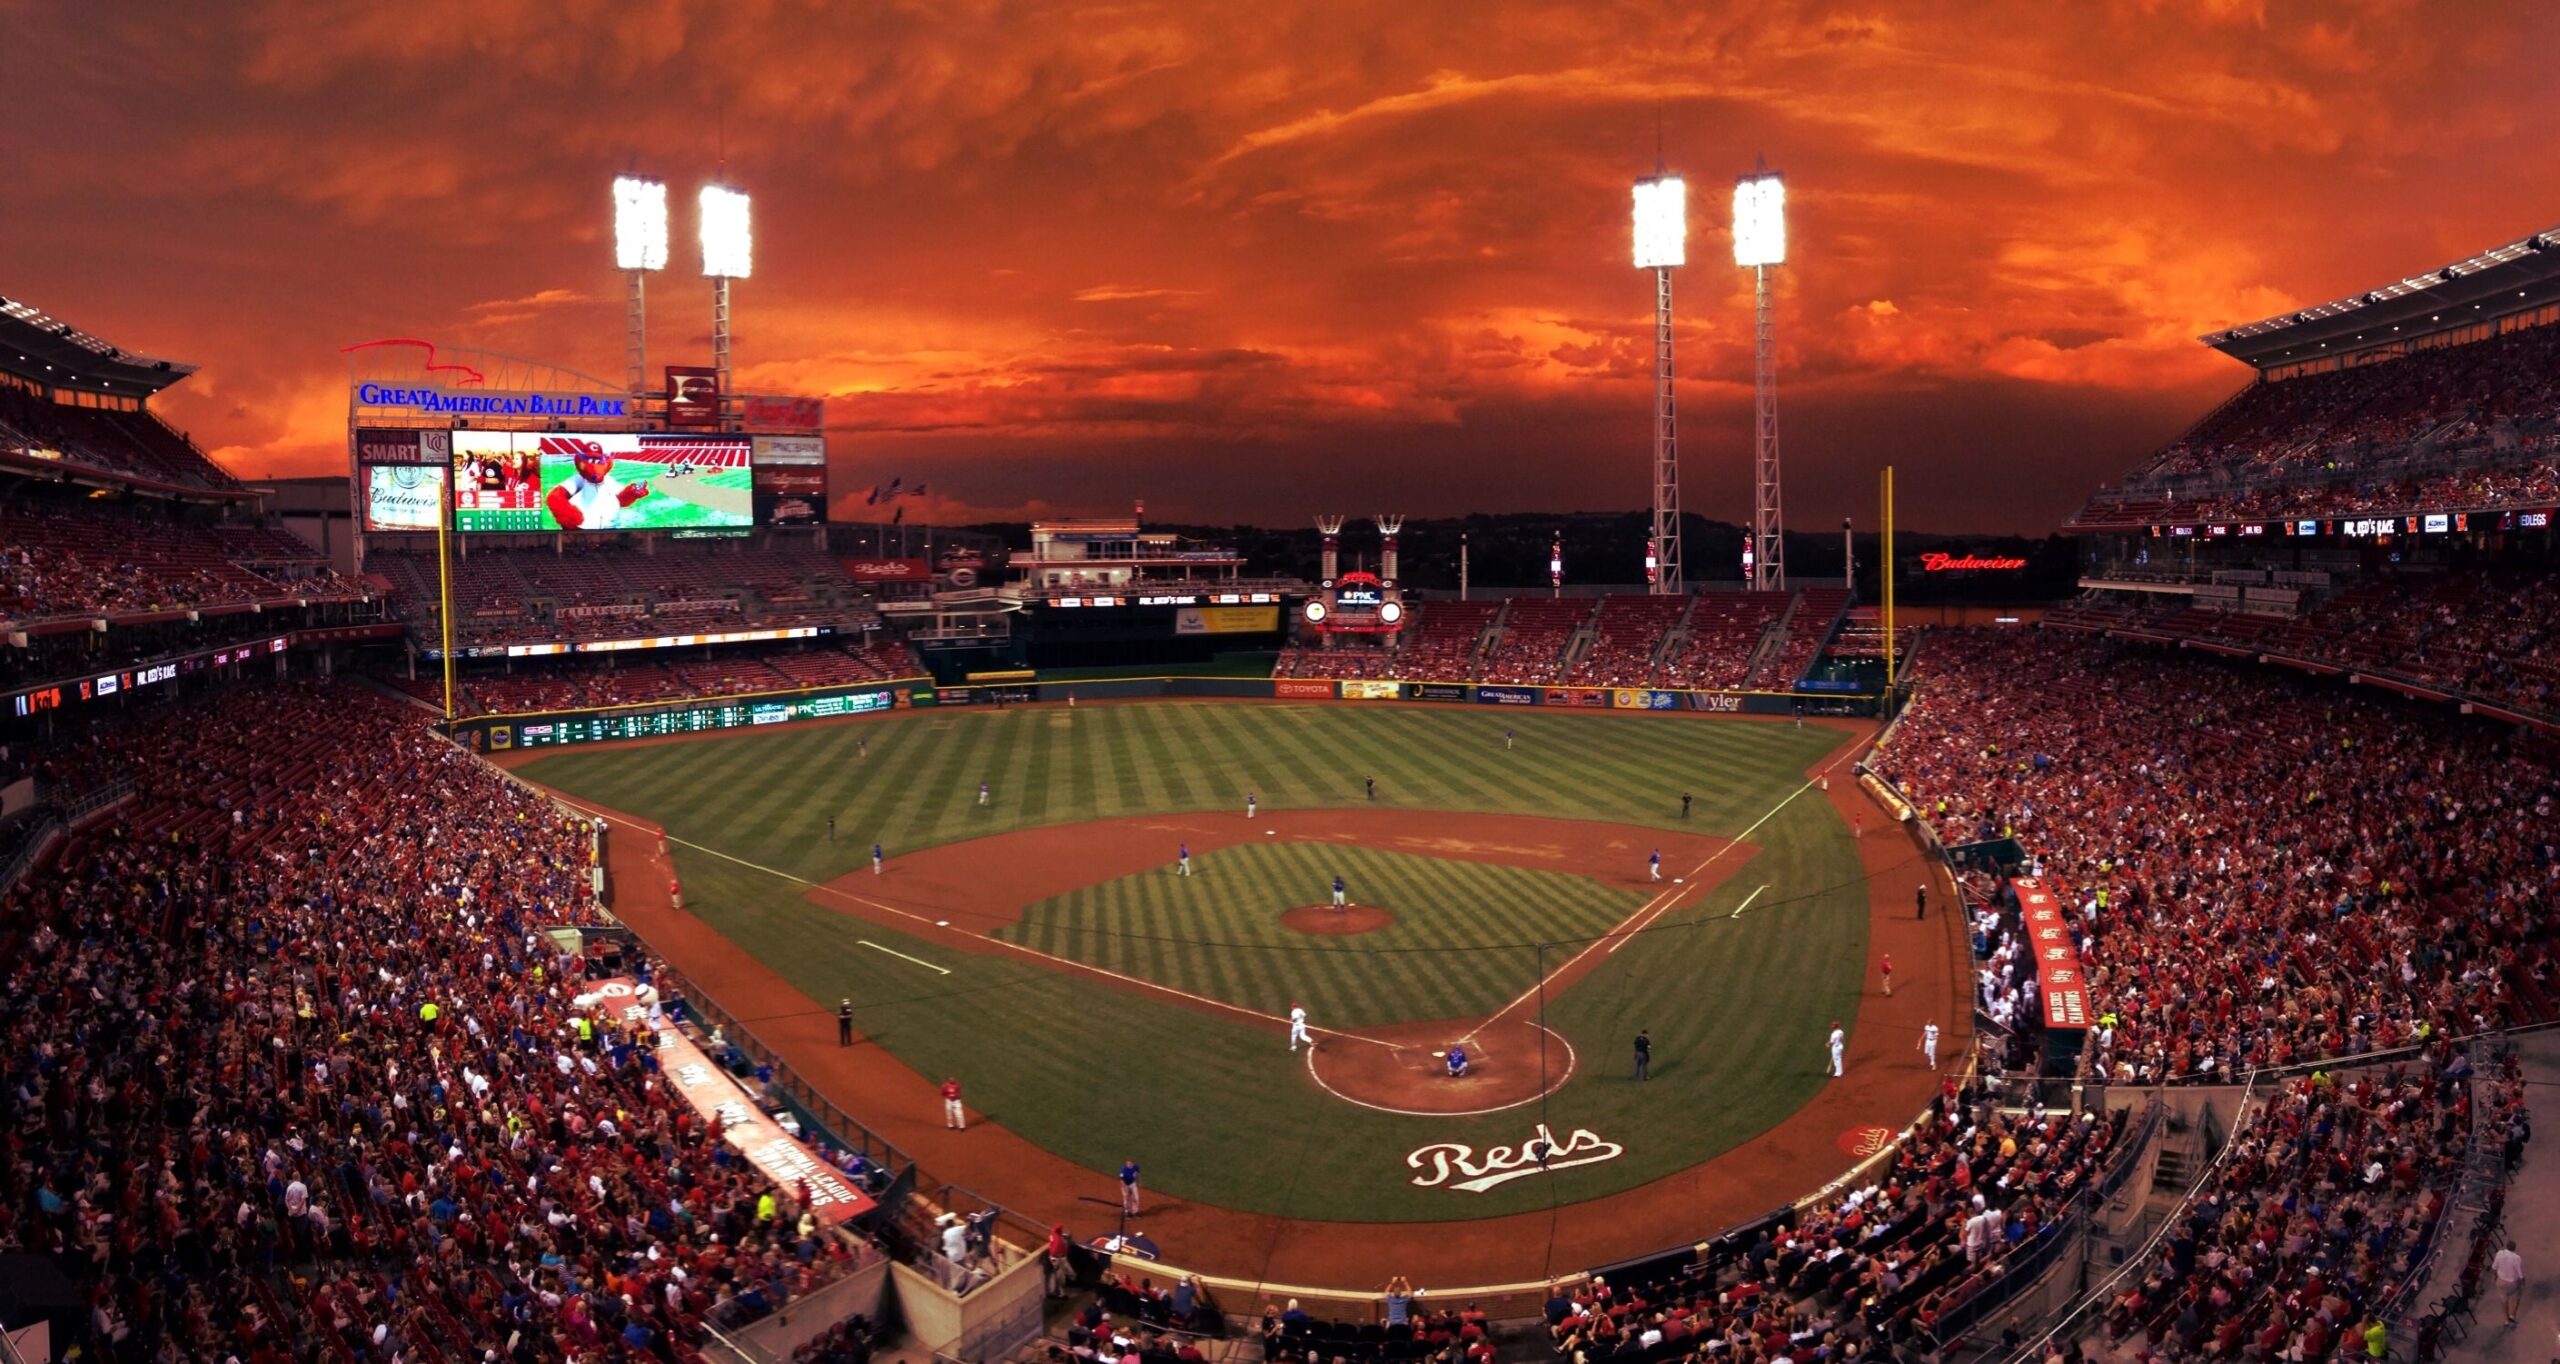 Great American Ball Park: Home of the Cincinnati Reds - The